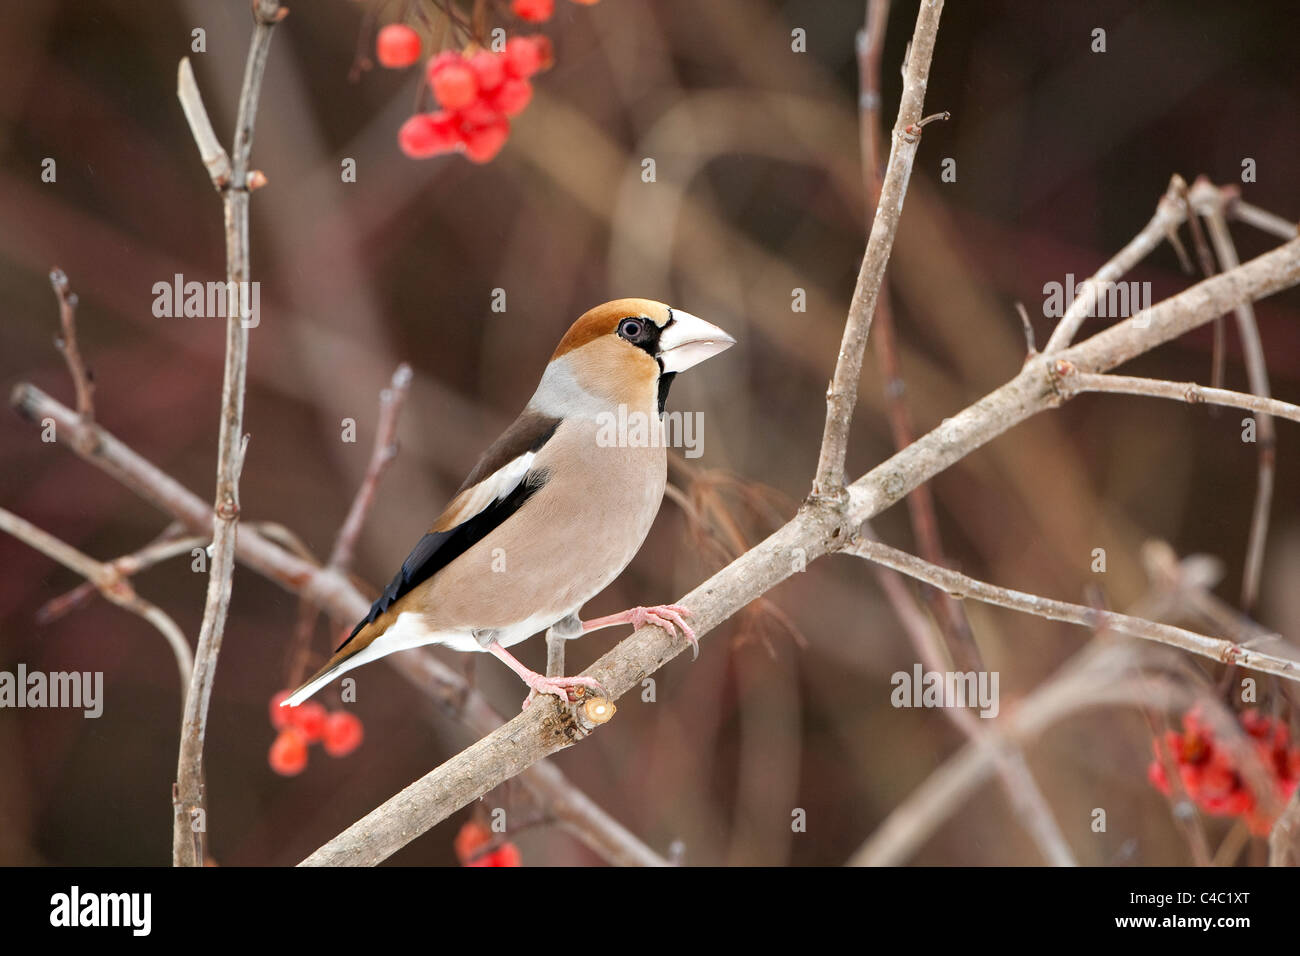 Hawfinch (Coccothraustes coccothraustes) perched on branch Stock Photo